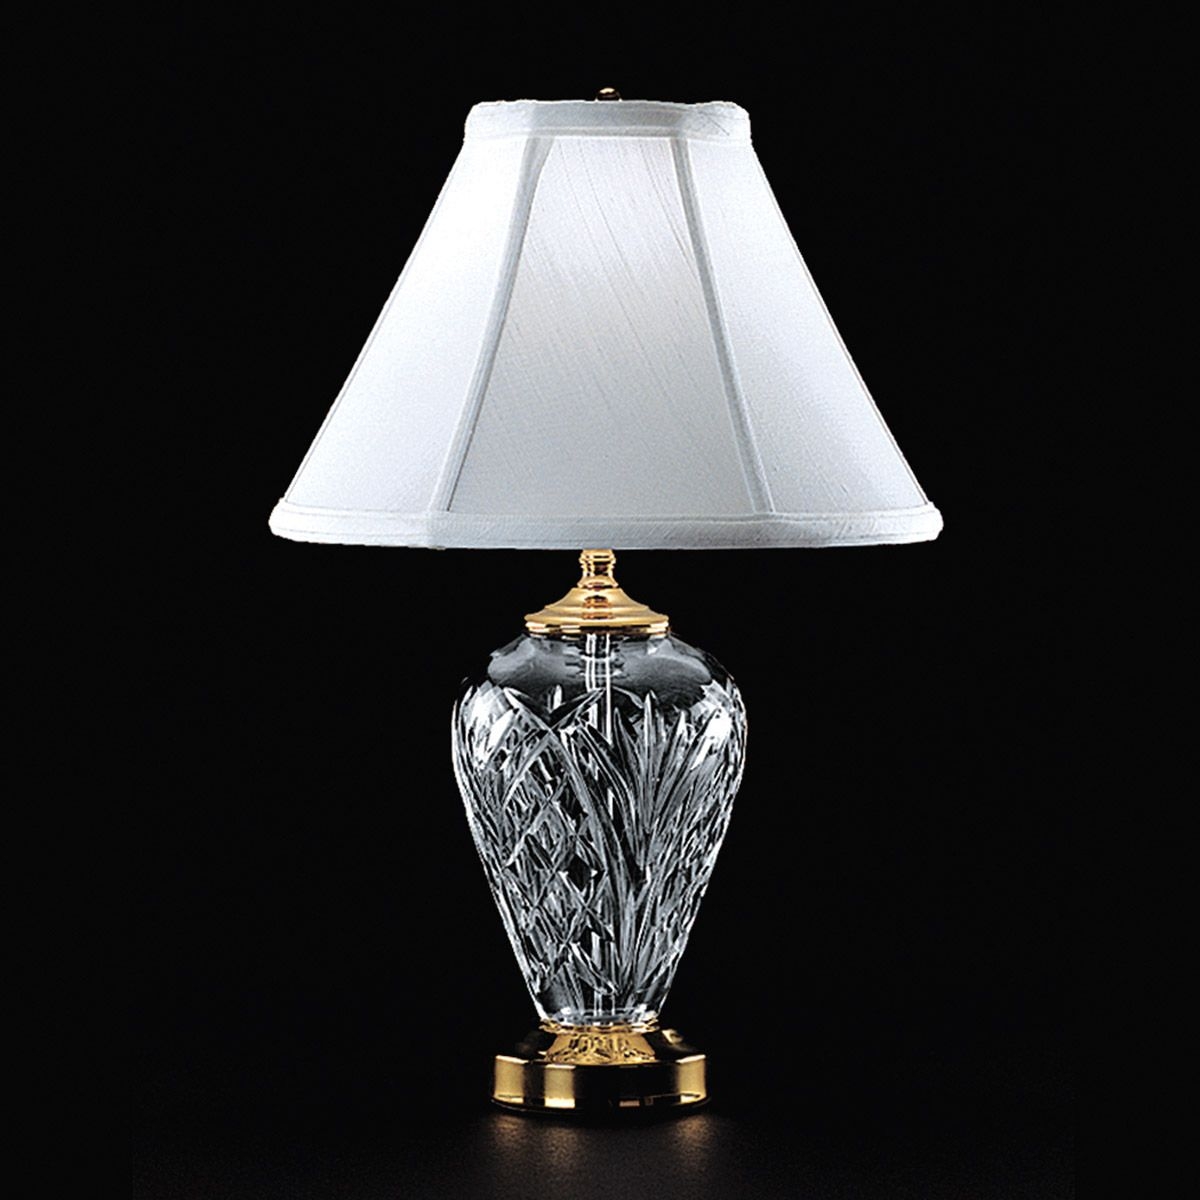 Waterford crystal polished brass kilkenny accent lamp 020 465 07